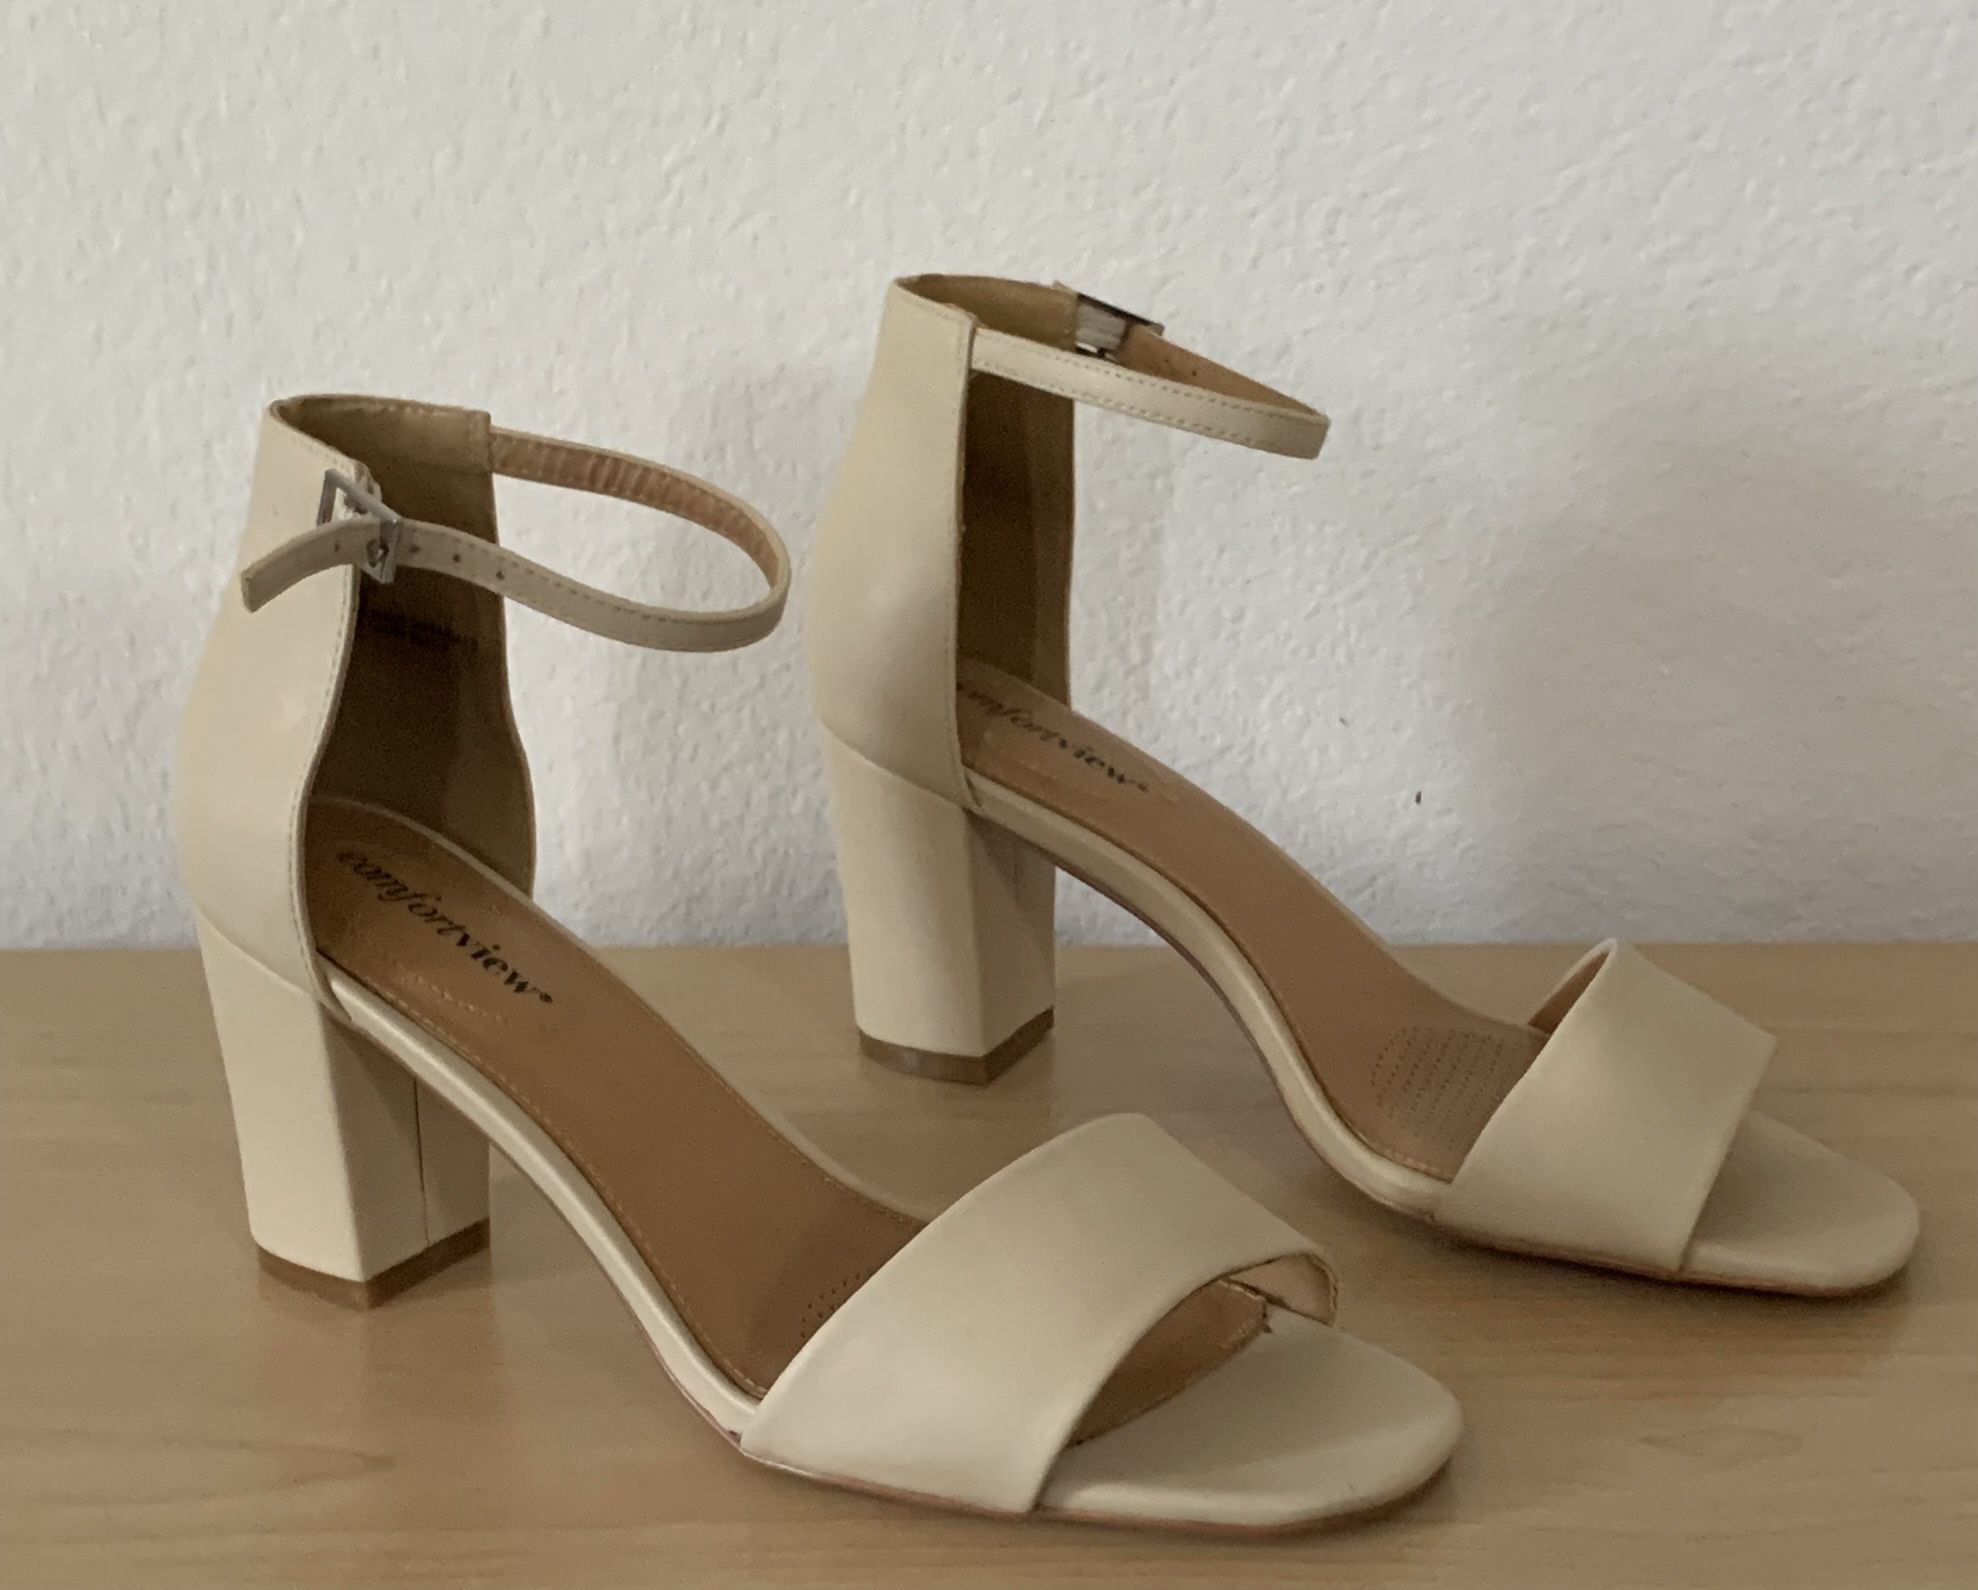 Brand New New Ivory Ankle Strap Heels, Women Size 9 Mid Heel